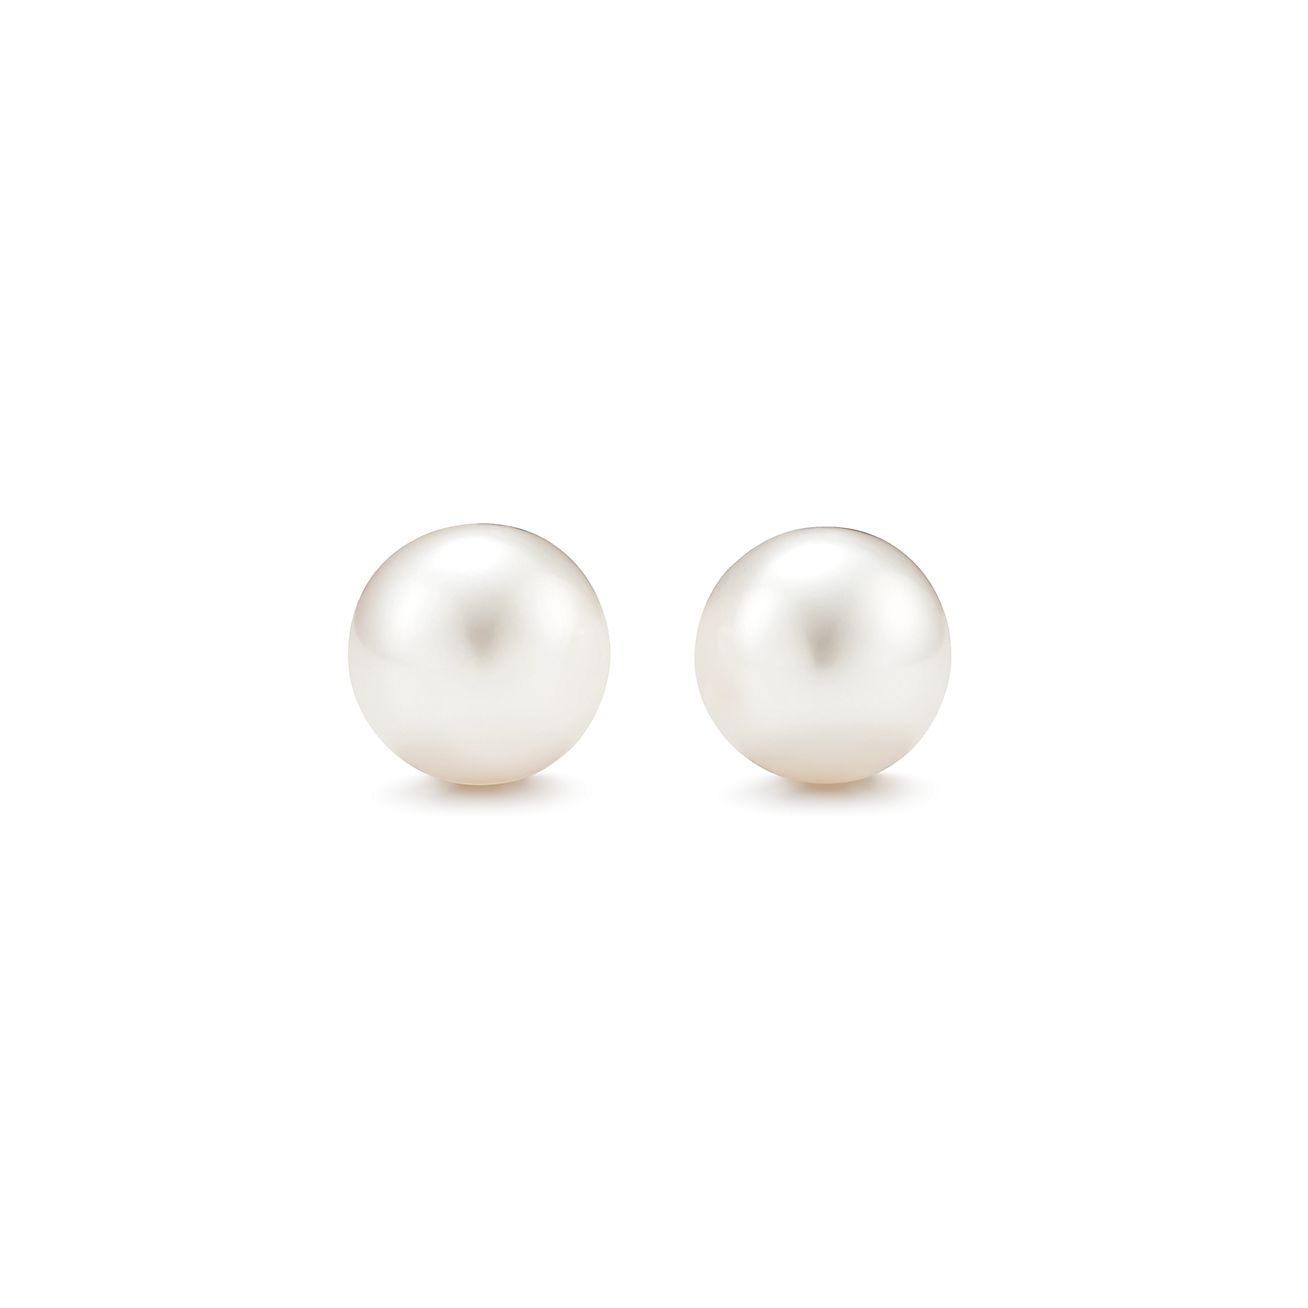 Earrings in sterling silver with freshwater cultured pearls, for pierced  ears. Pearls, 8-9 mm. | Tiffany &